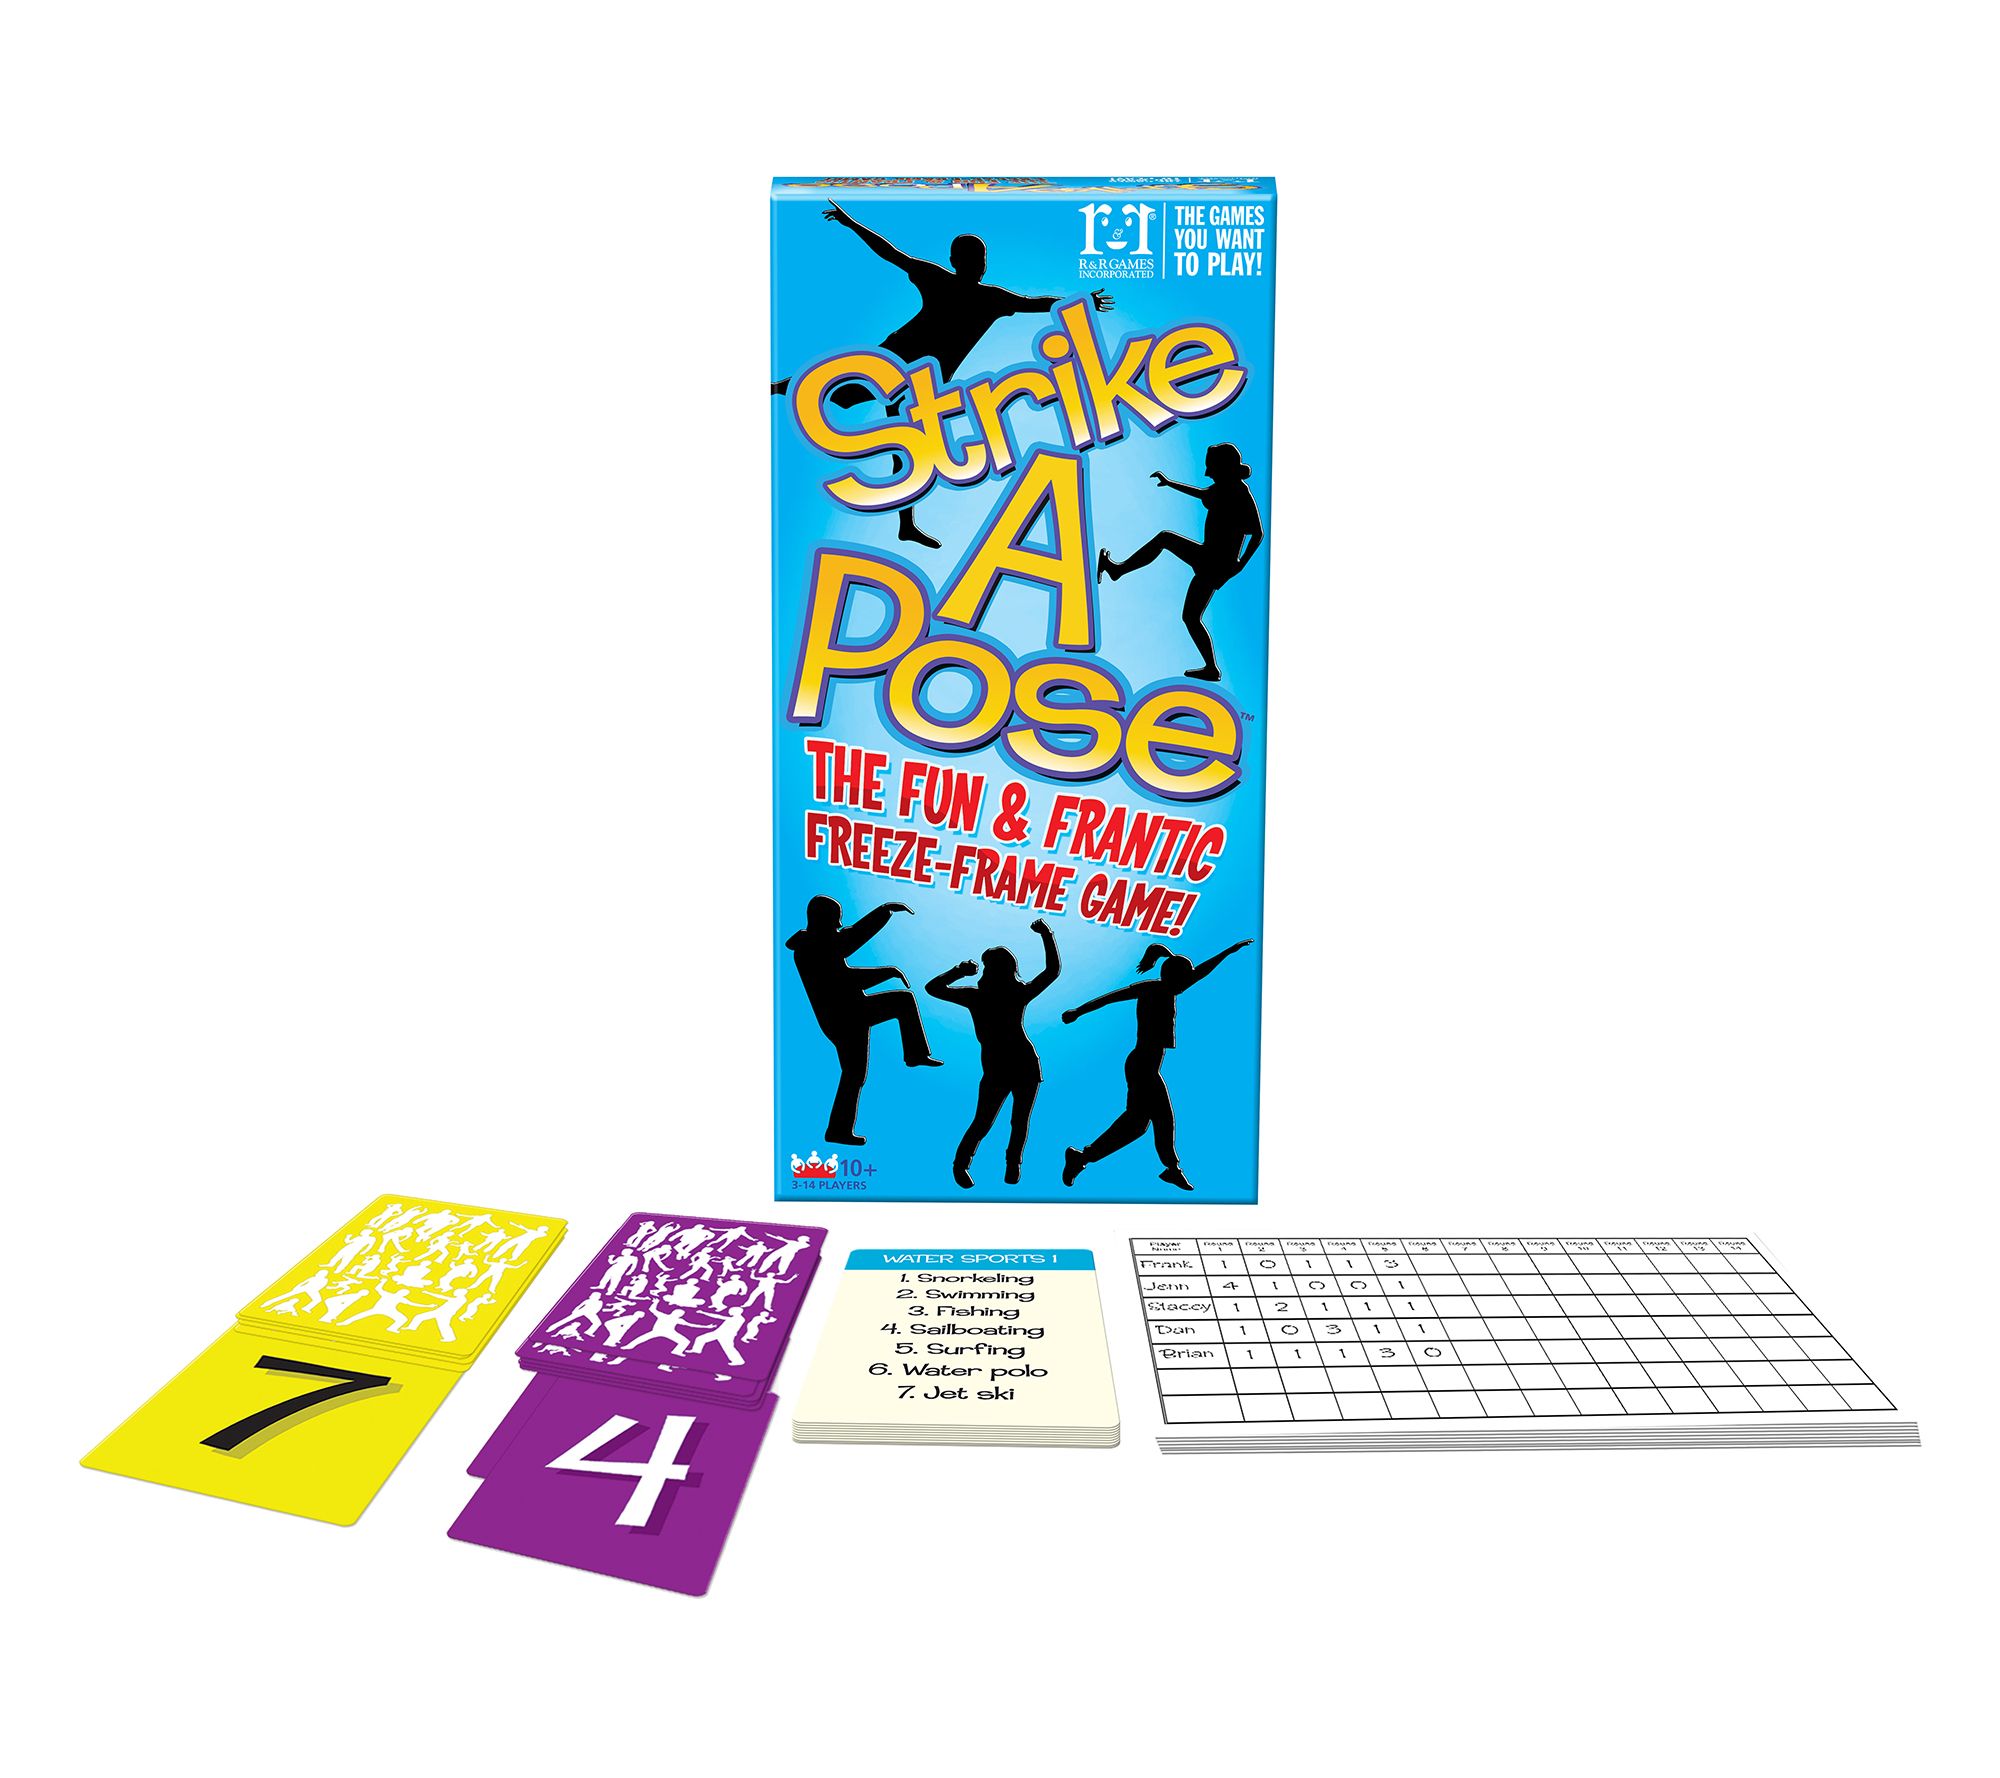 WorldWise Imports Curses! The Game - Fun Party Game - For Ages 14